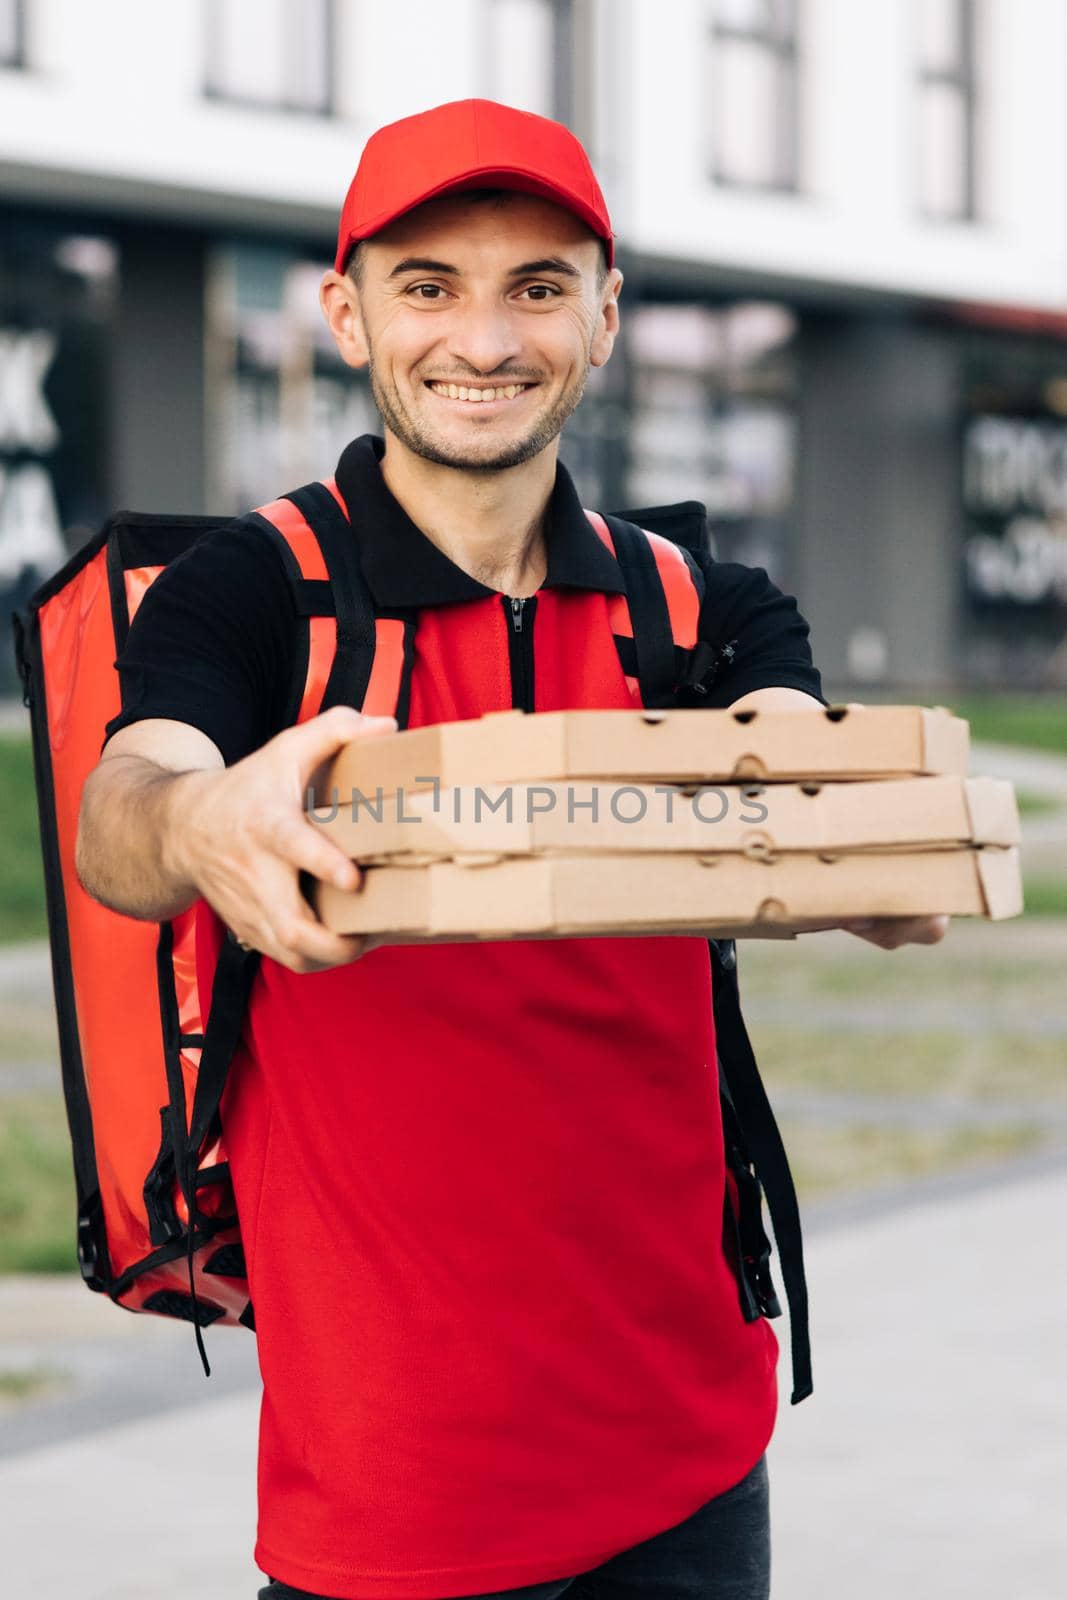 Attractive young delivery man courier in red cap smiling into camera holding pizza boxes delivering fast food around city. Outdoor portrait. Urban worker. Concept of courier, home delivery, pizza by uflypro